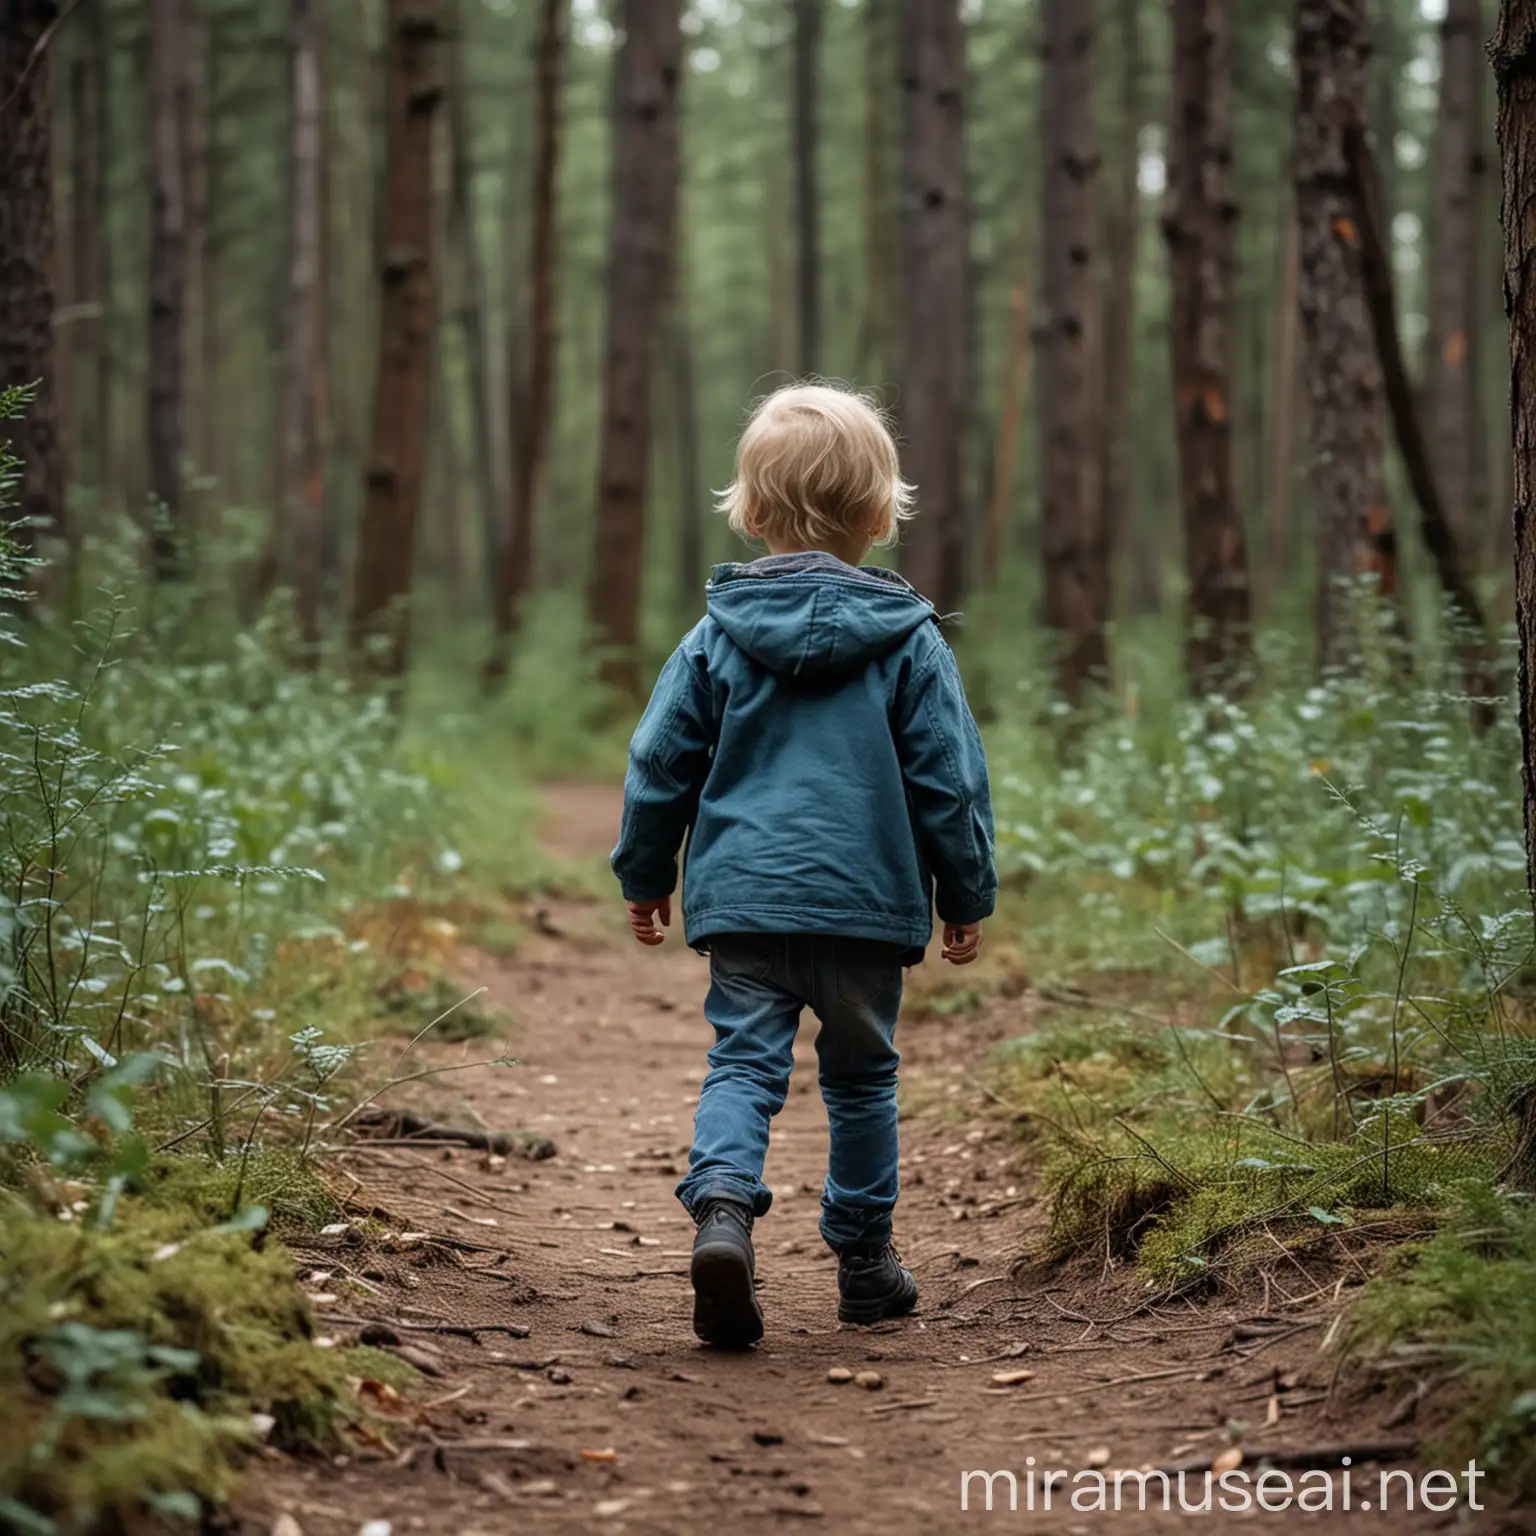 Exploring Adventure Child Walking in Enchanted Forest